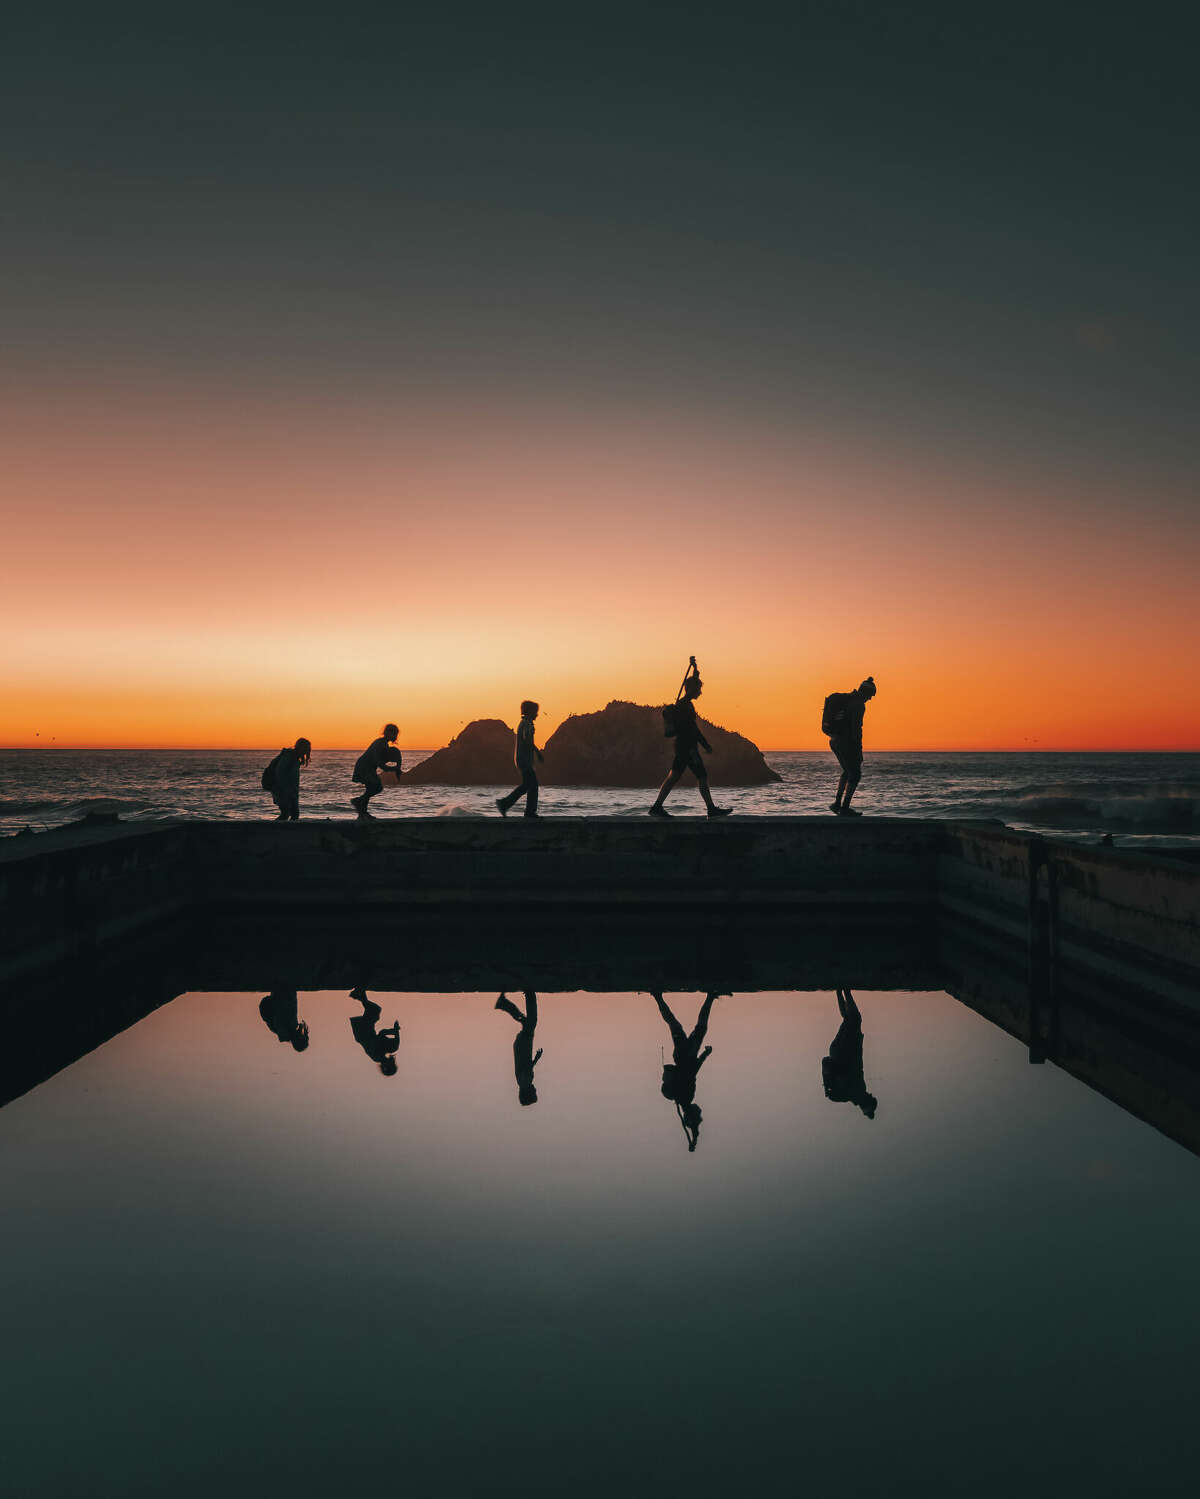 Josh Singh combines San Francisco's natural beauty with human elements in his photographs showcased on his Instagram page @josh7185.